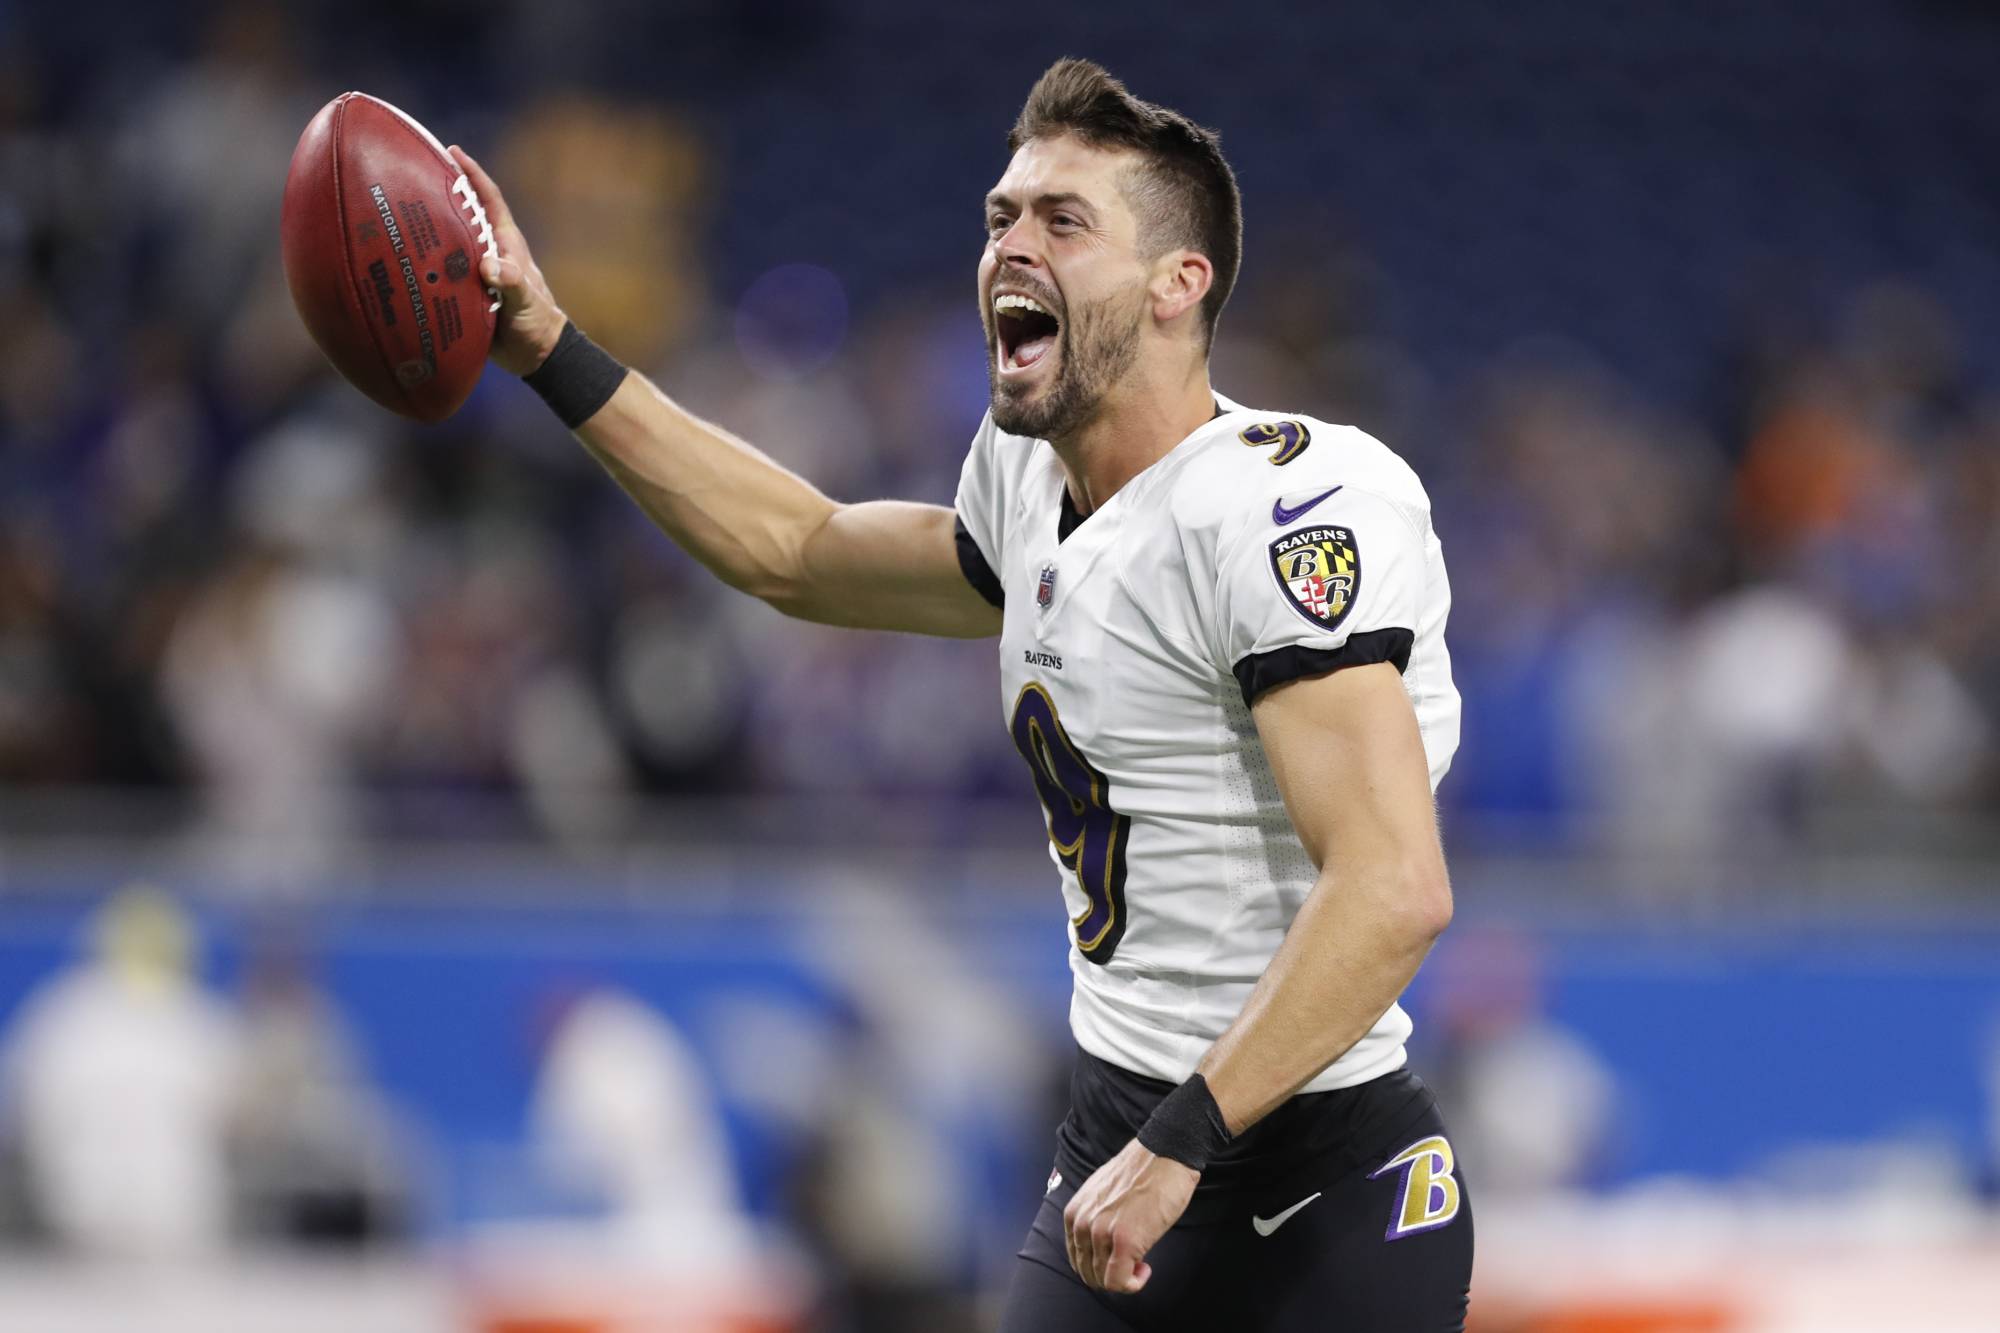 NFL Justin Tucker Record 66 yard Goal Leads Ravens to Wild Win!